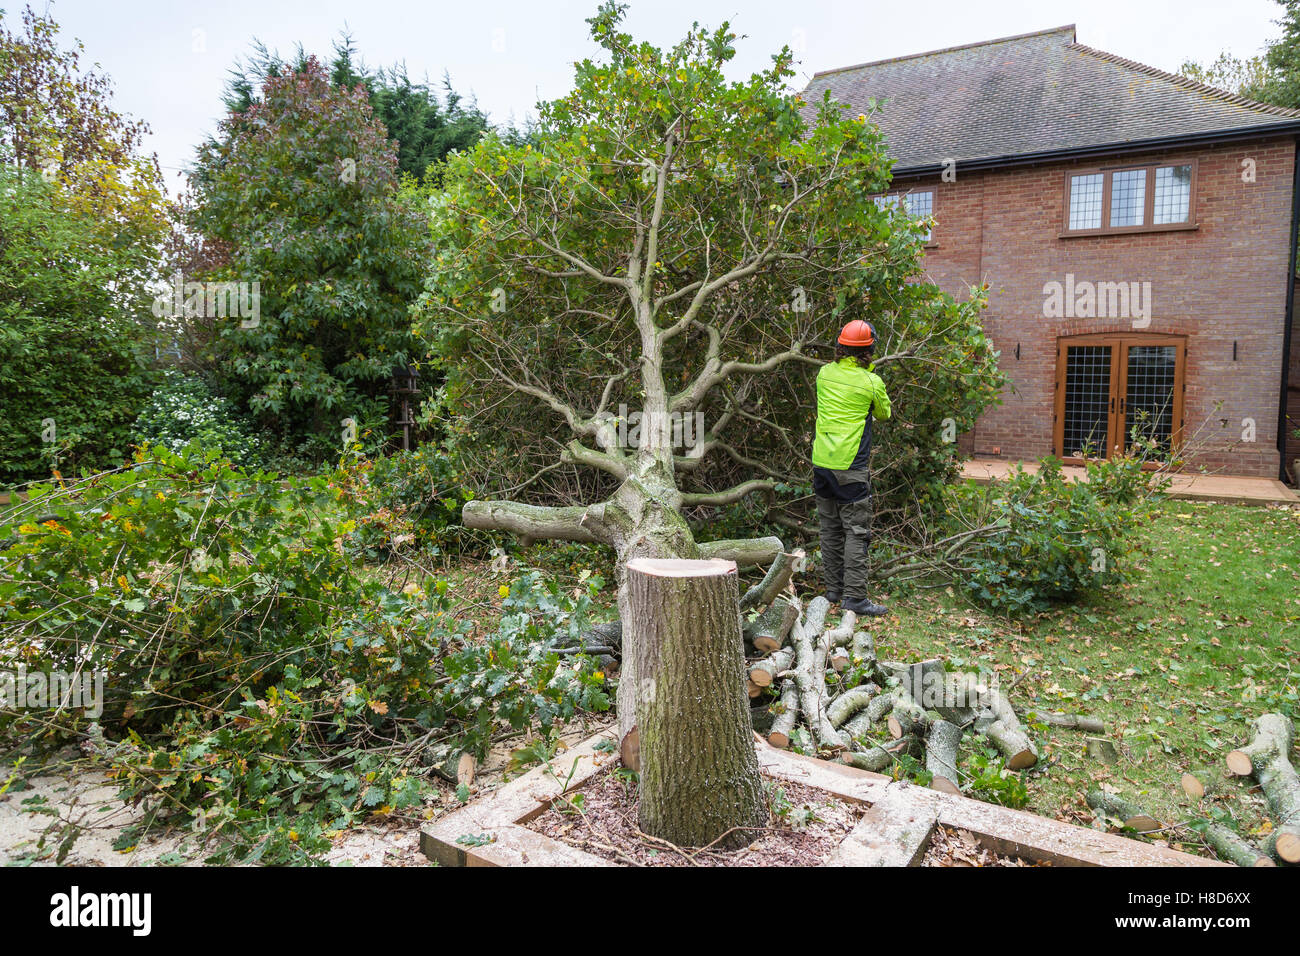 An oak tree in cut down in a garden near a house. The stump is in the foreground with ring in the wood. A lumberjack in hi-viz a Stock Photo